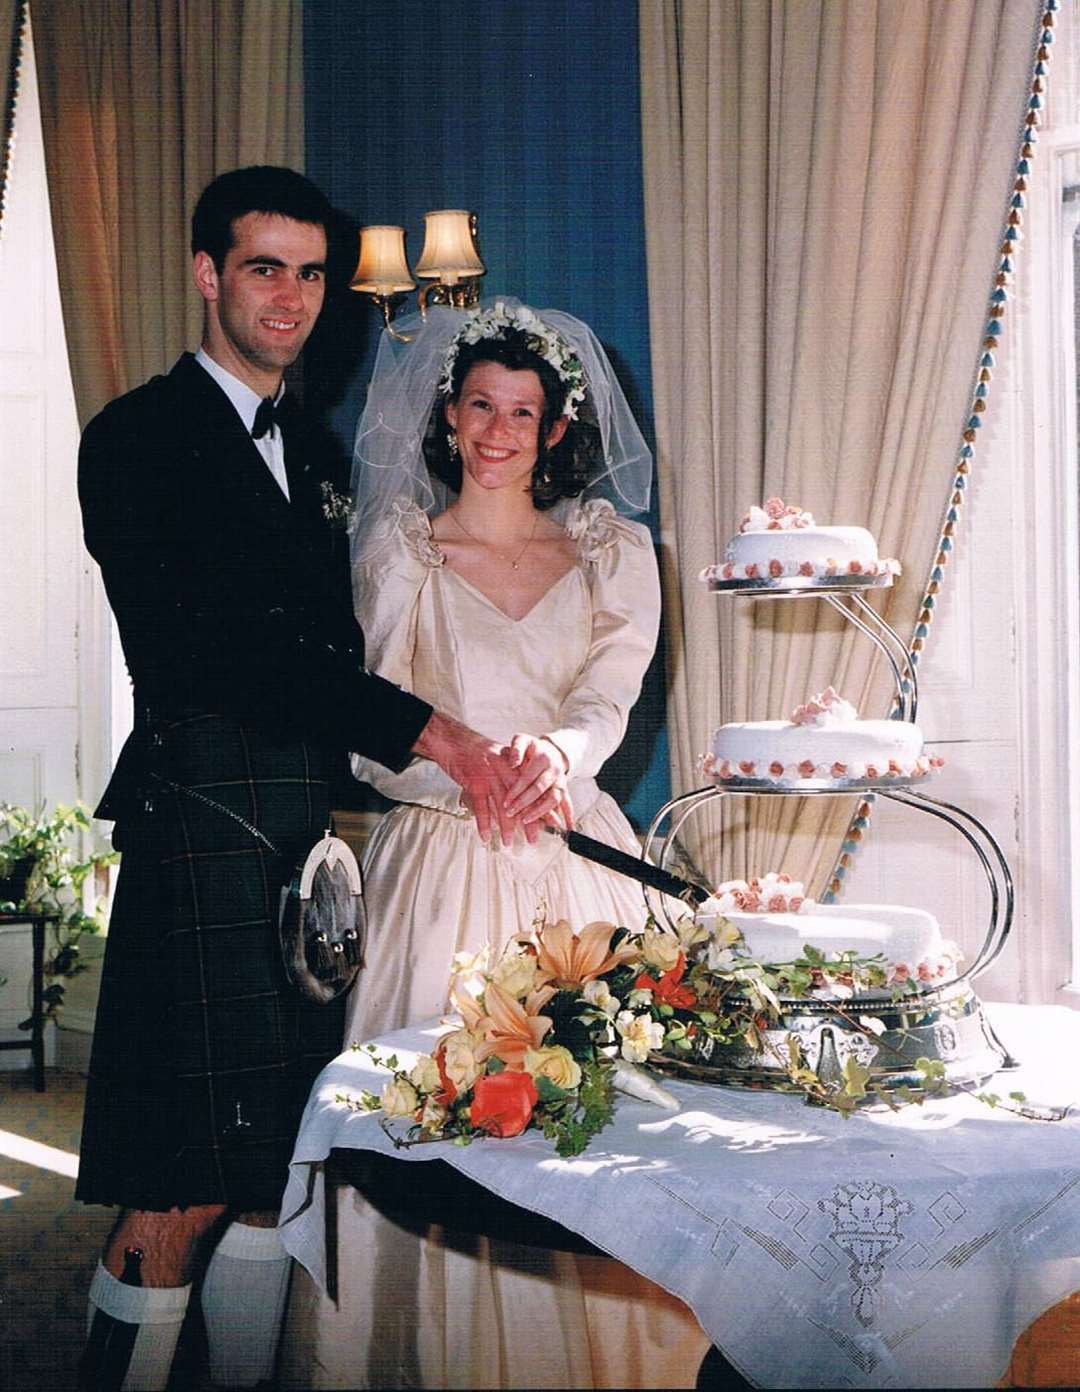 Nicky Marr and Colin Marr on their wedding day in 1994